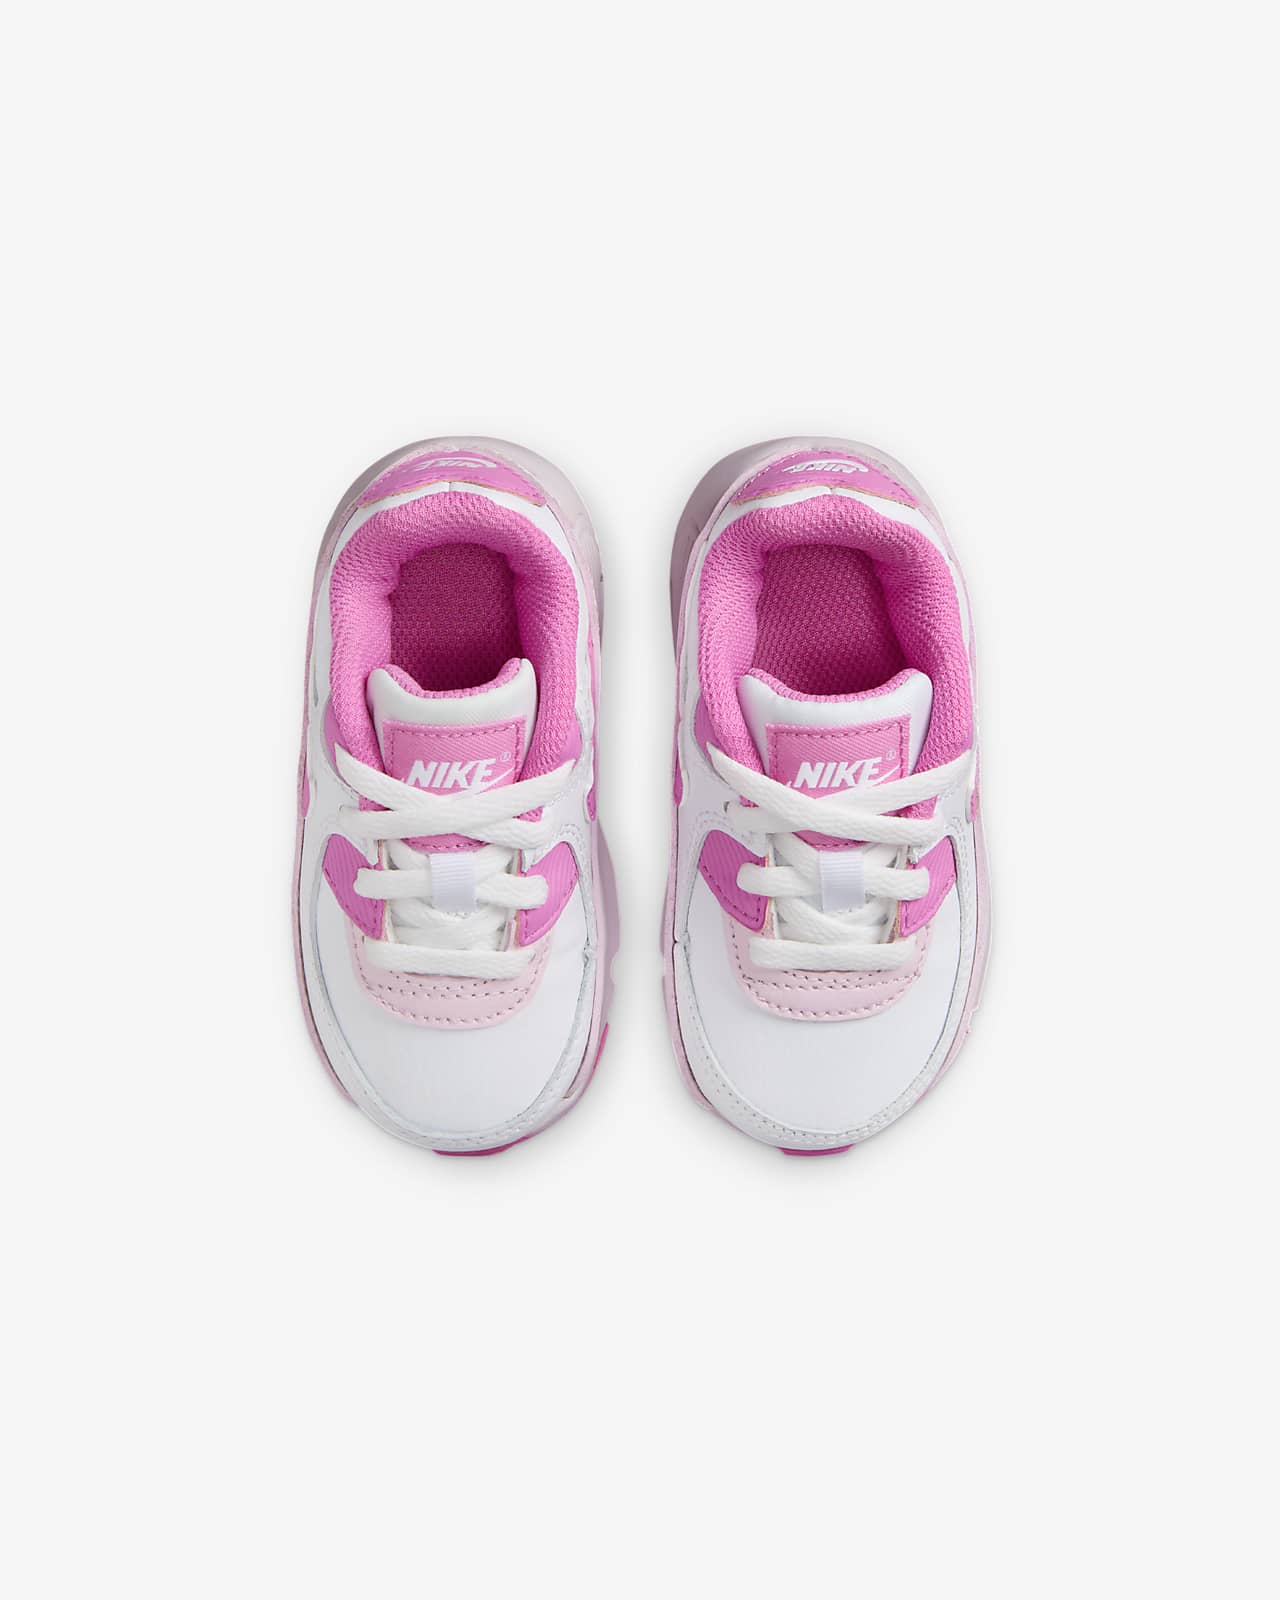 Nike Air Max 90 Baby/Toddler Shoes.